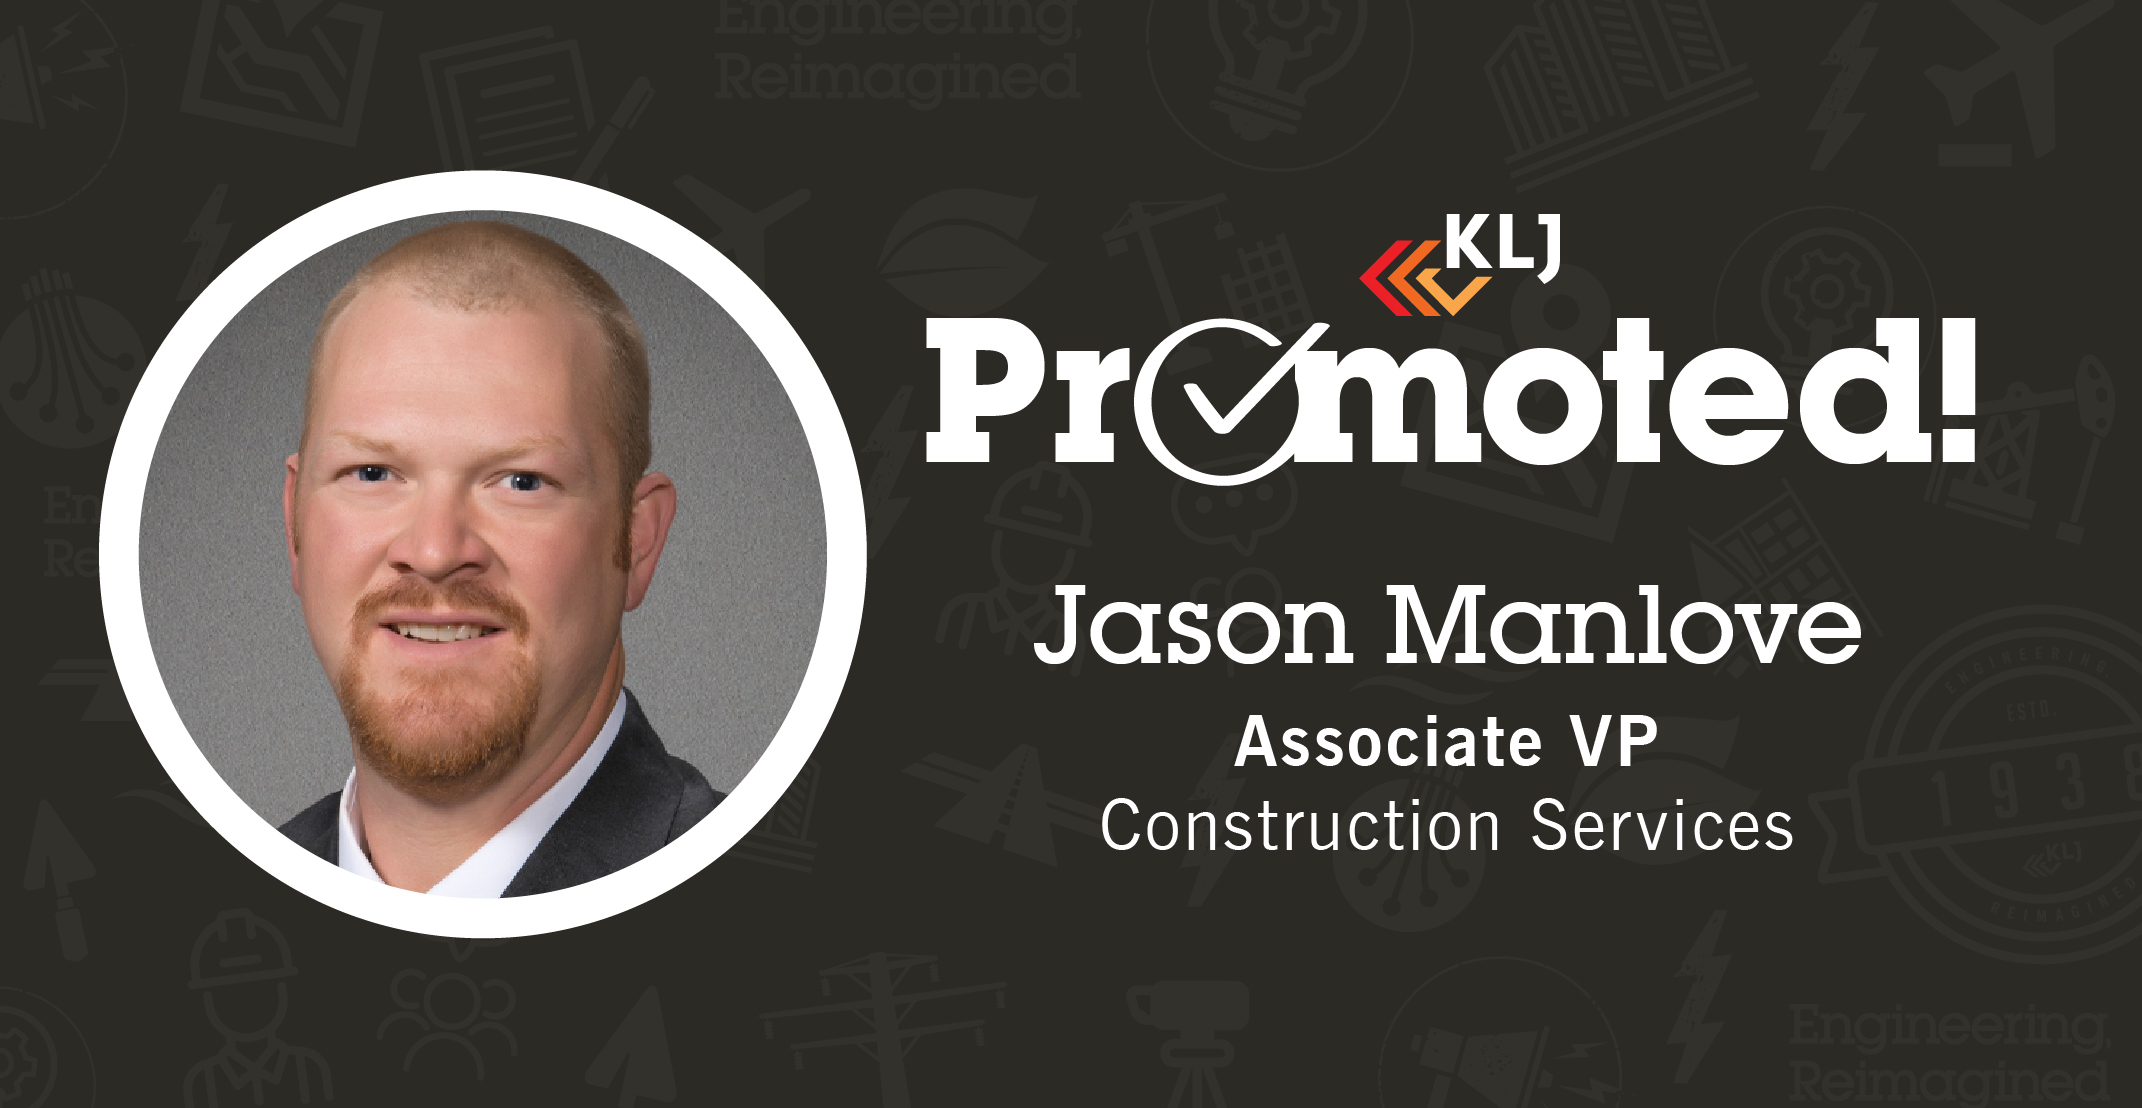 Manlove Promoted to Associate Vice President of KLJ’s Construction Services